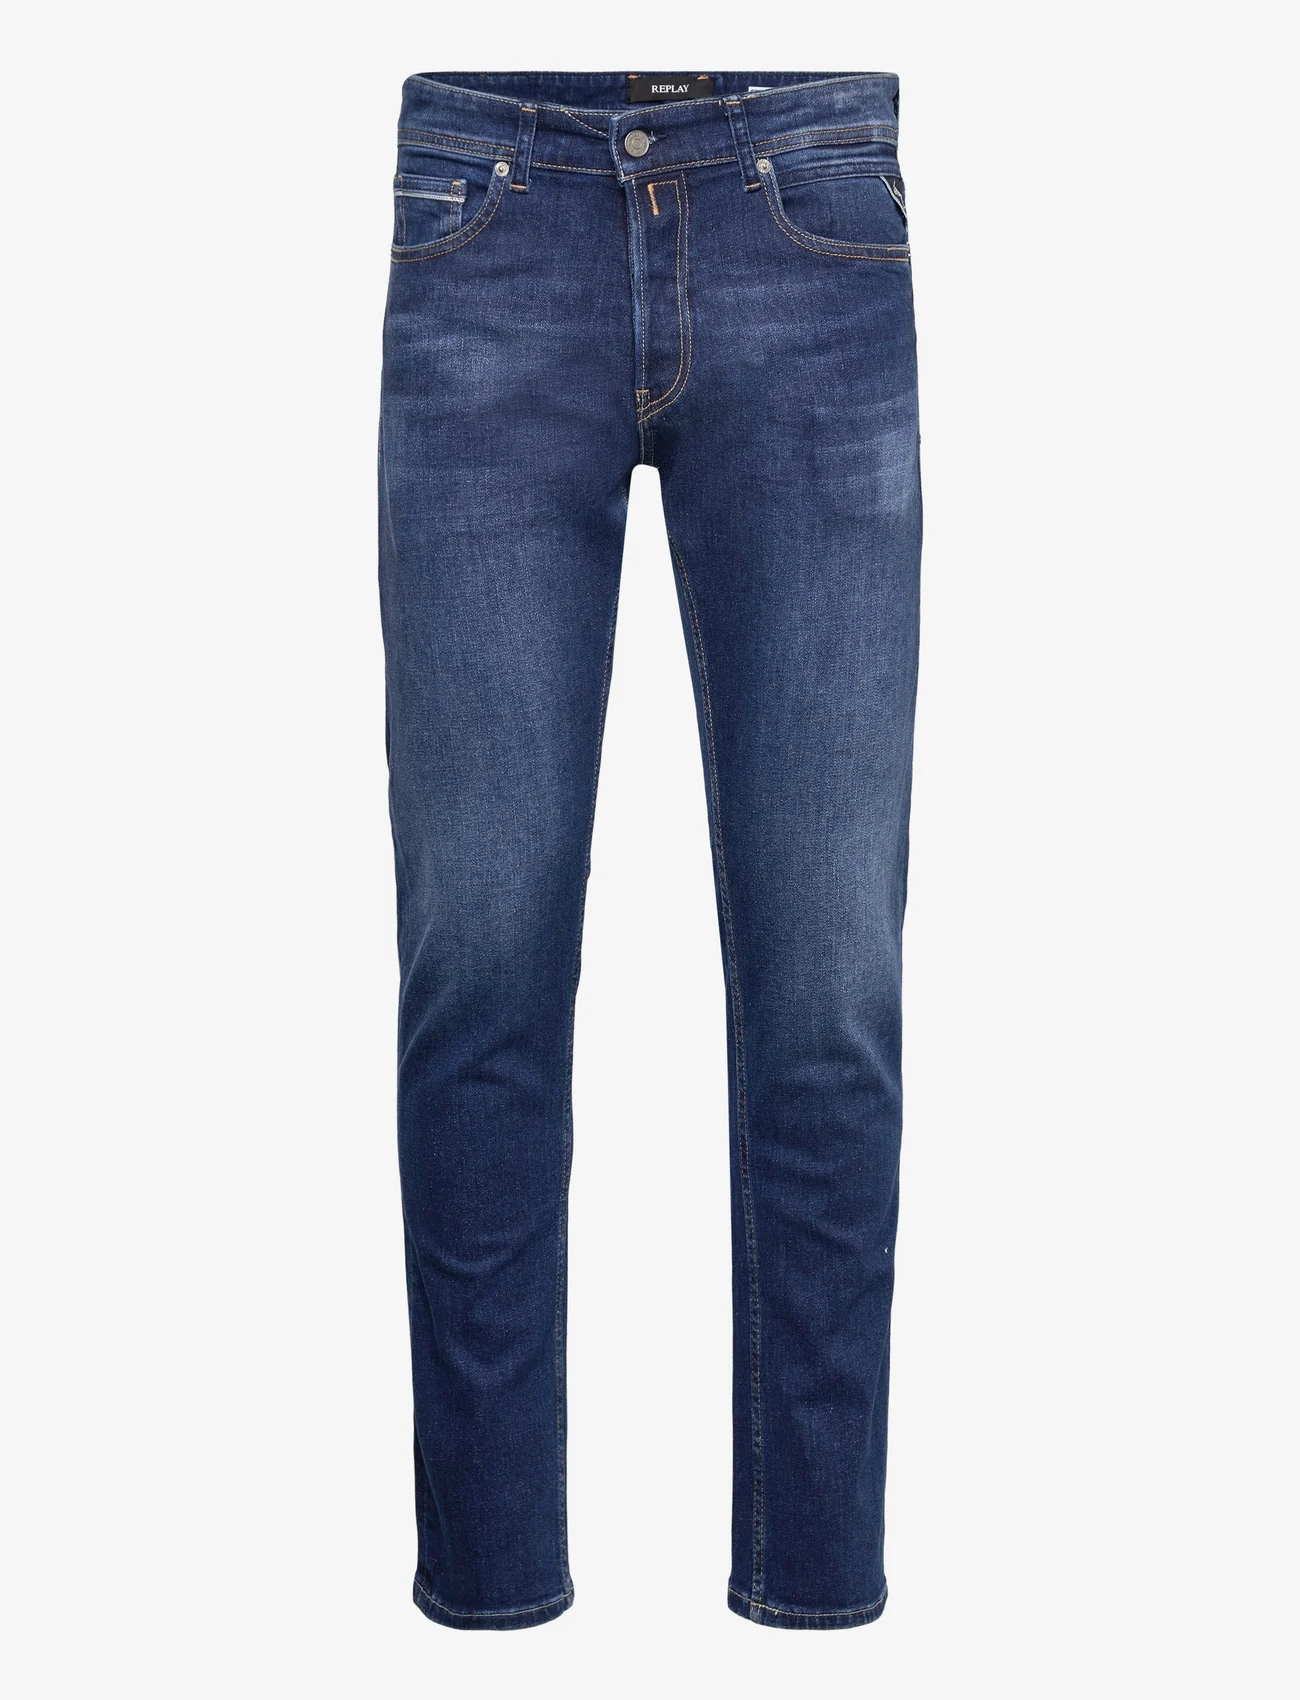 Replay - GROVER Trousers STRAIGHT 99 Denim - slim jeans - blue - 0